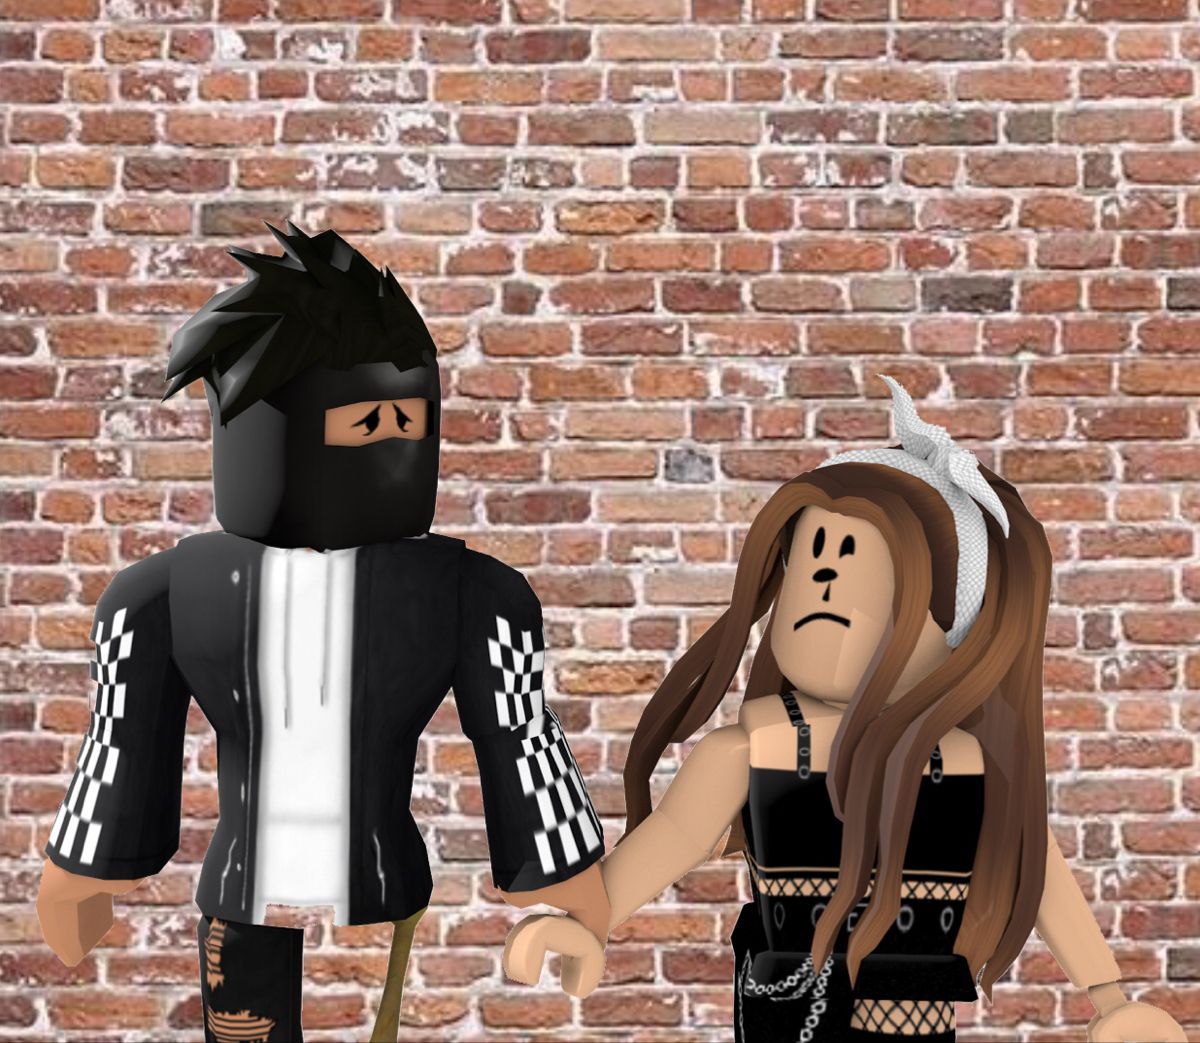 For C1ouldyTearzz and SilverWolfDagger. Cute couple picture, Roblox picture, Couple outfits